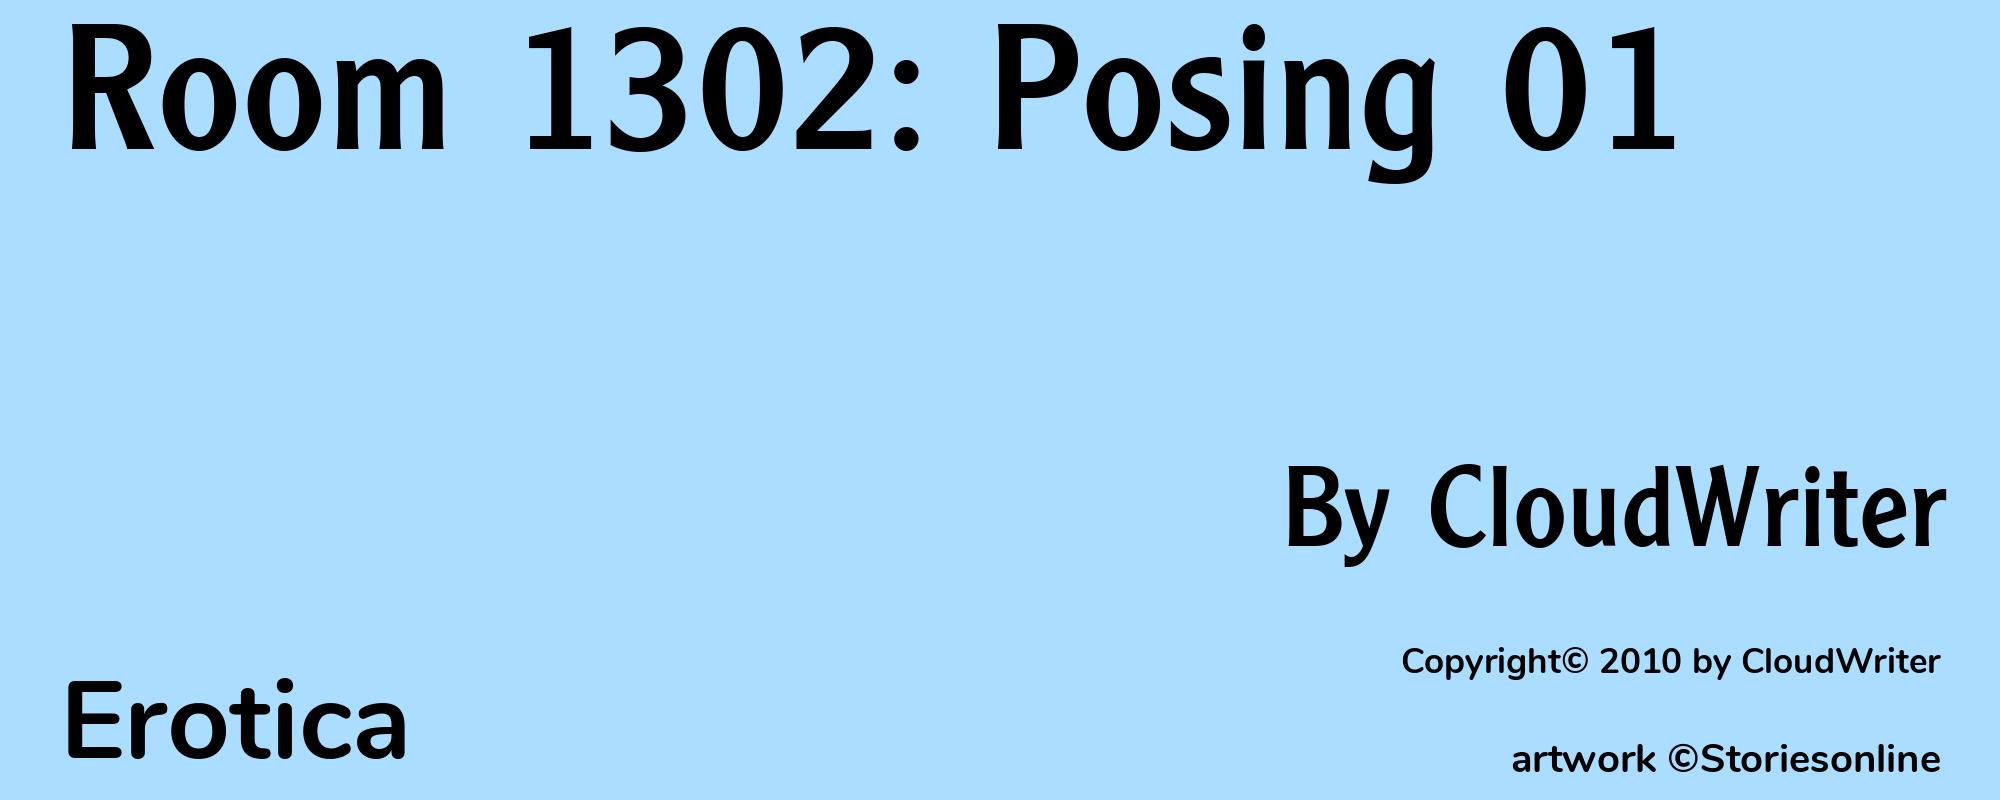 Room 1302: Posing 01 - Cover